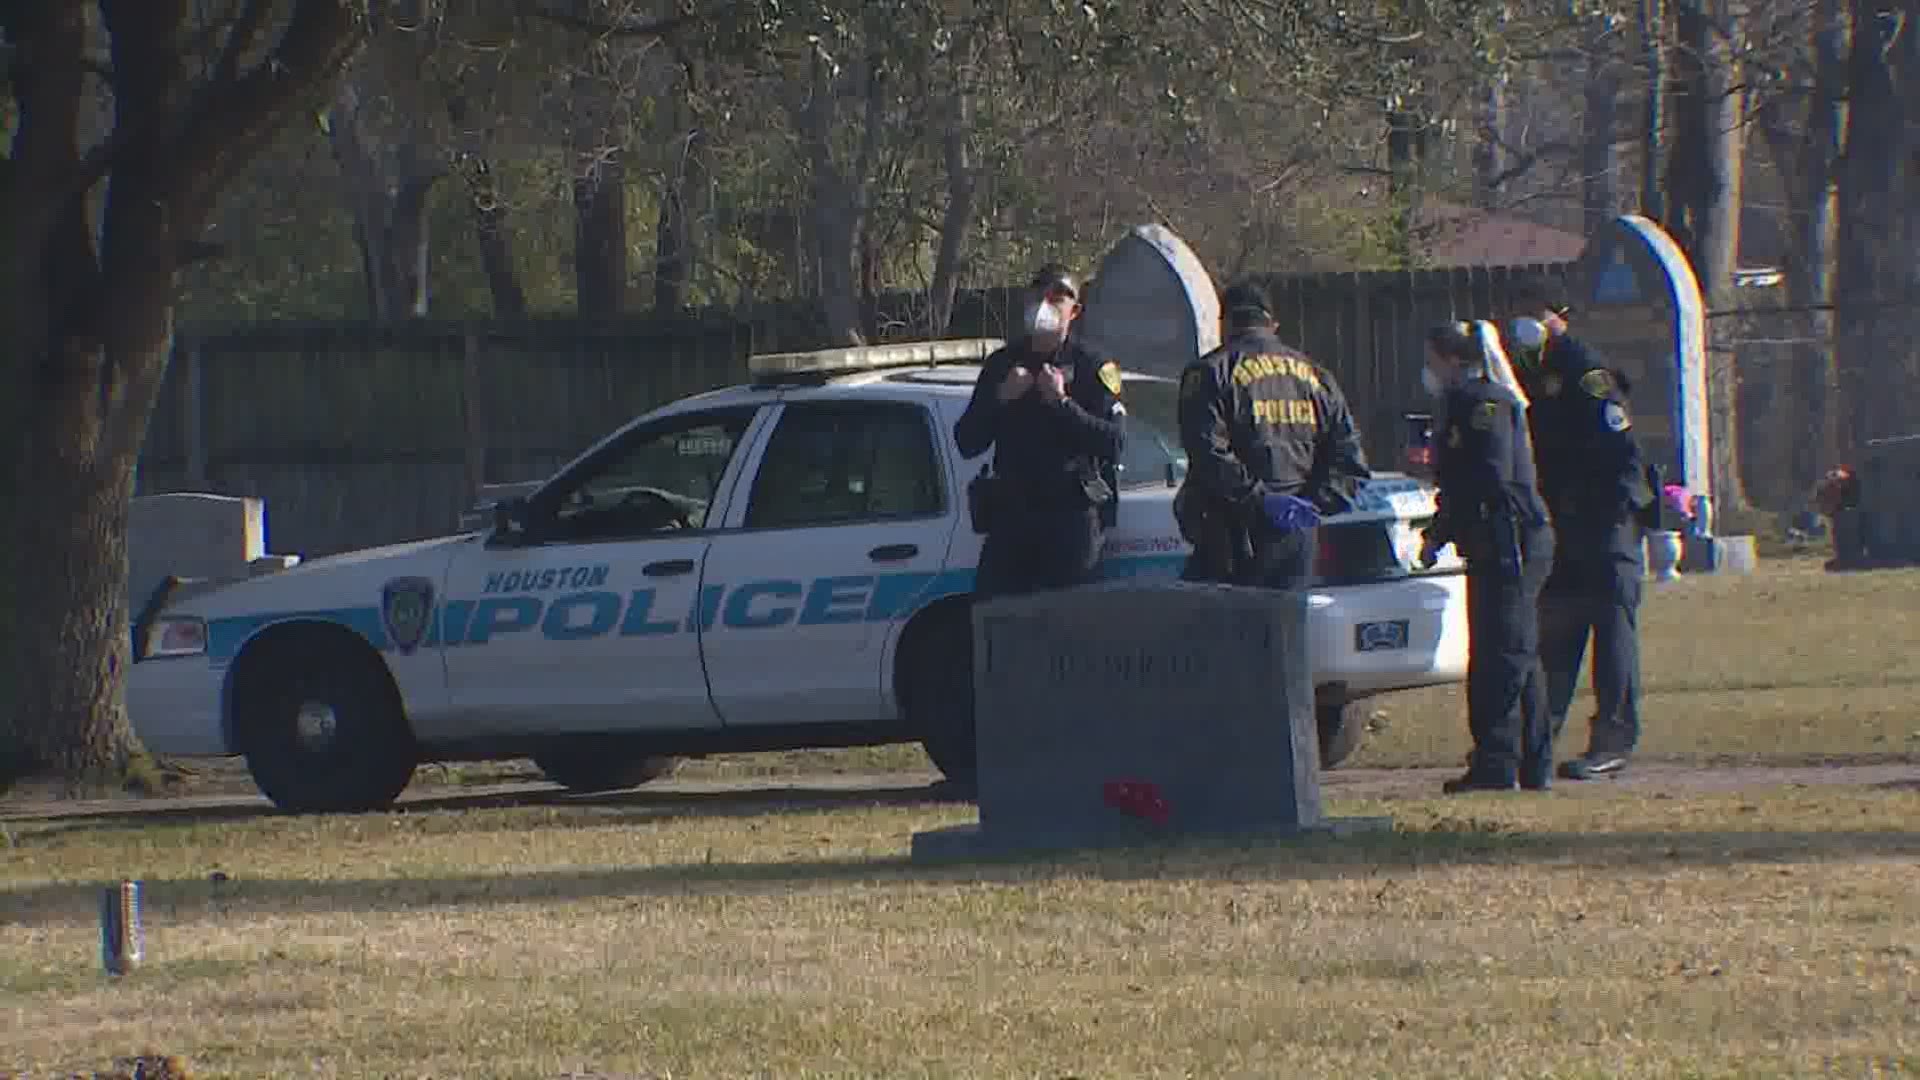 Houston police responded Tuesday morning to the Golden Gate Cemetery where a man was found dead near a vehicle. It's been declared a homicide.